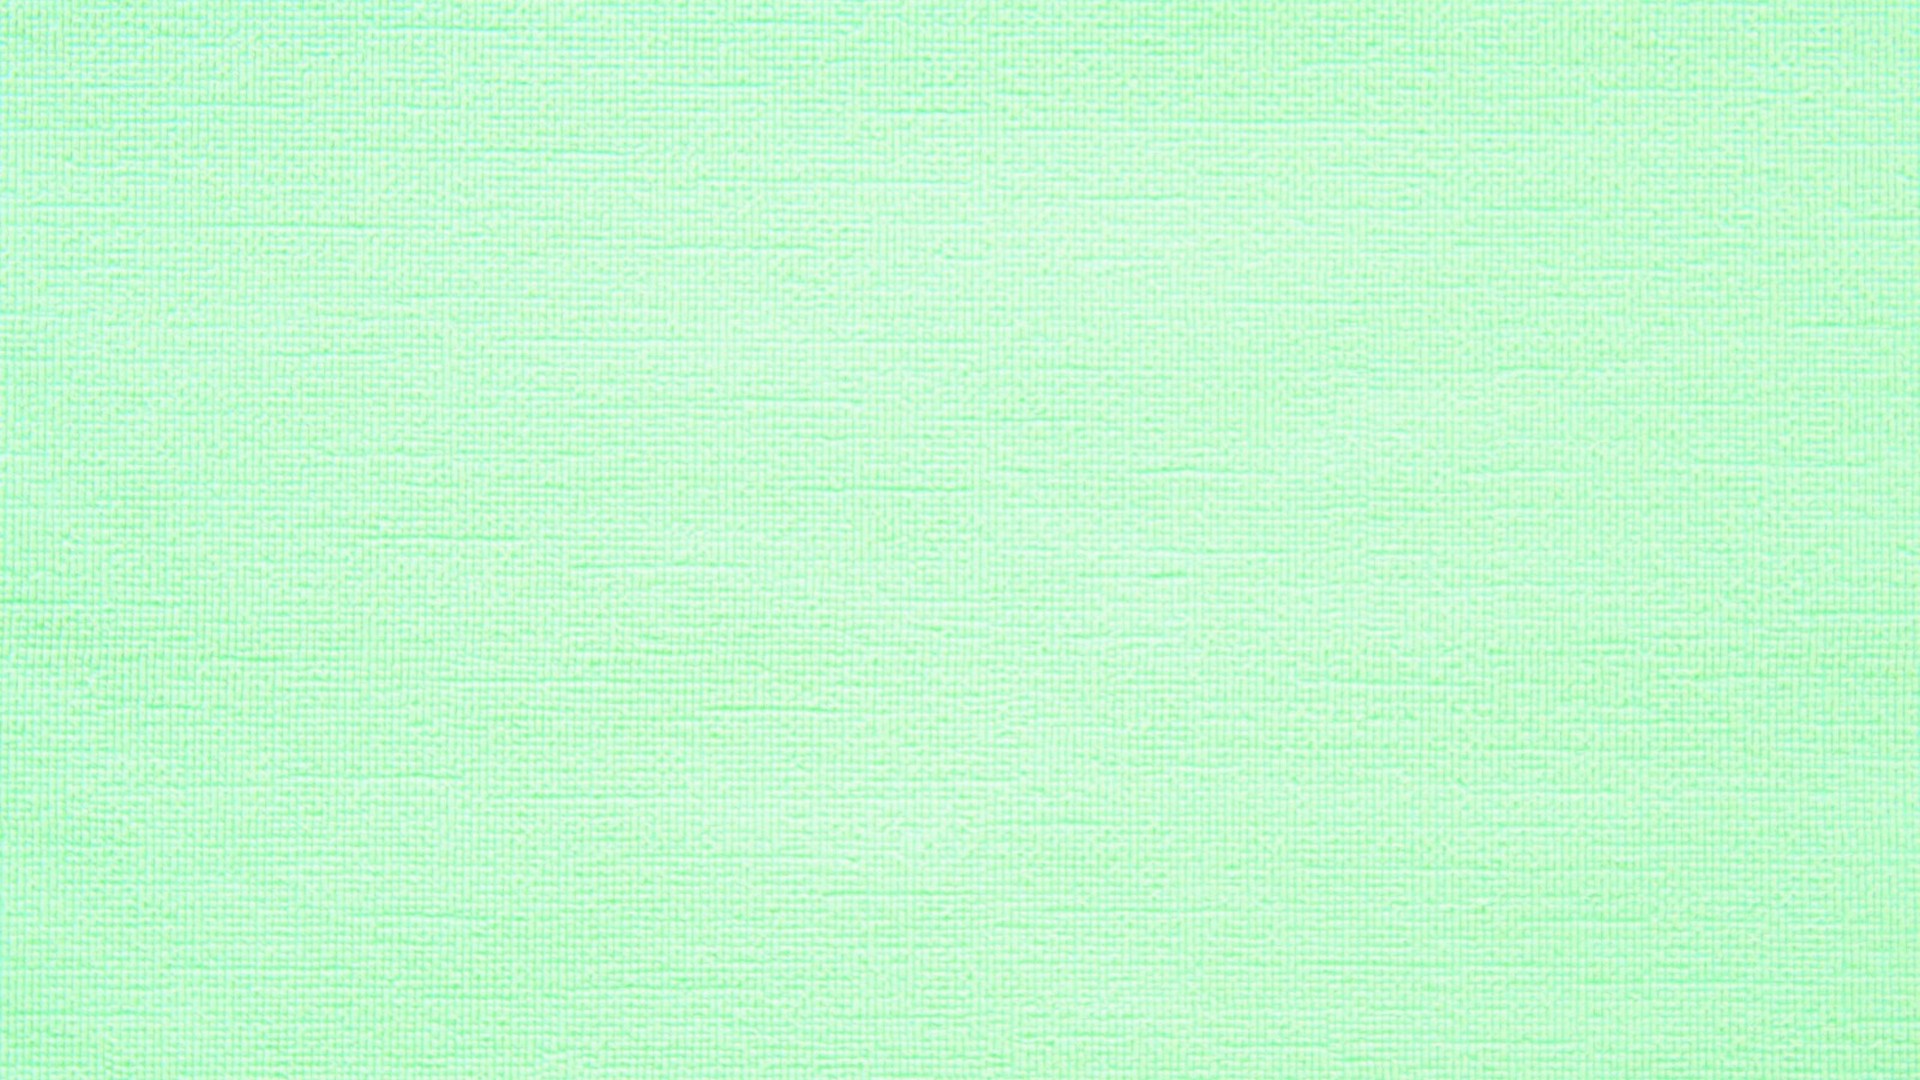 Cute Green HD Backgrounds with image resolution 1920x1080 pixel. You can make this wallpaper for your Desktop Computer Backgrounds, Mac Wallpapers, Android Lock screen or iPhone Screensavers